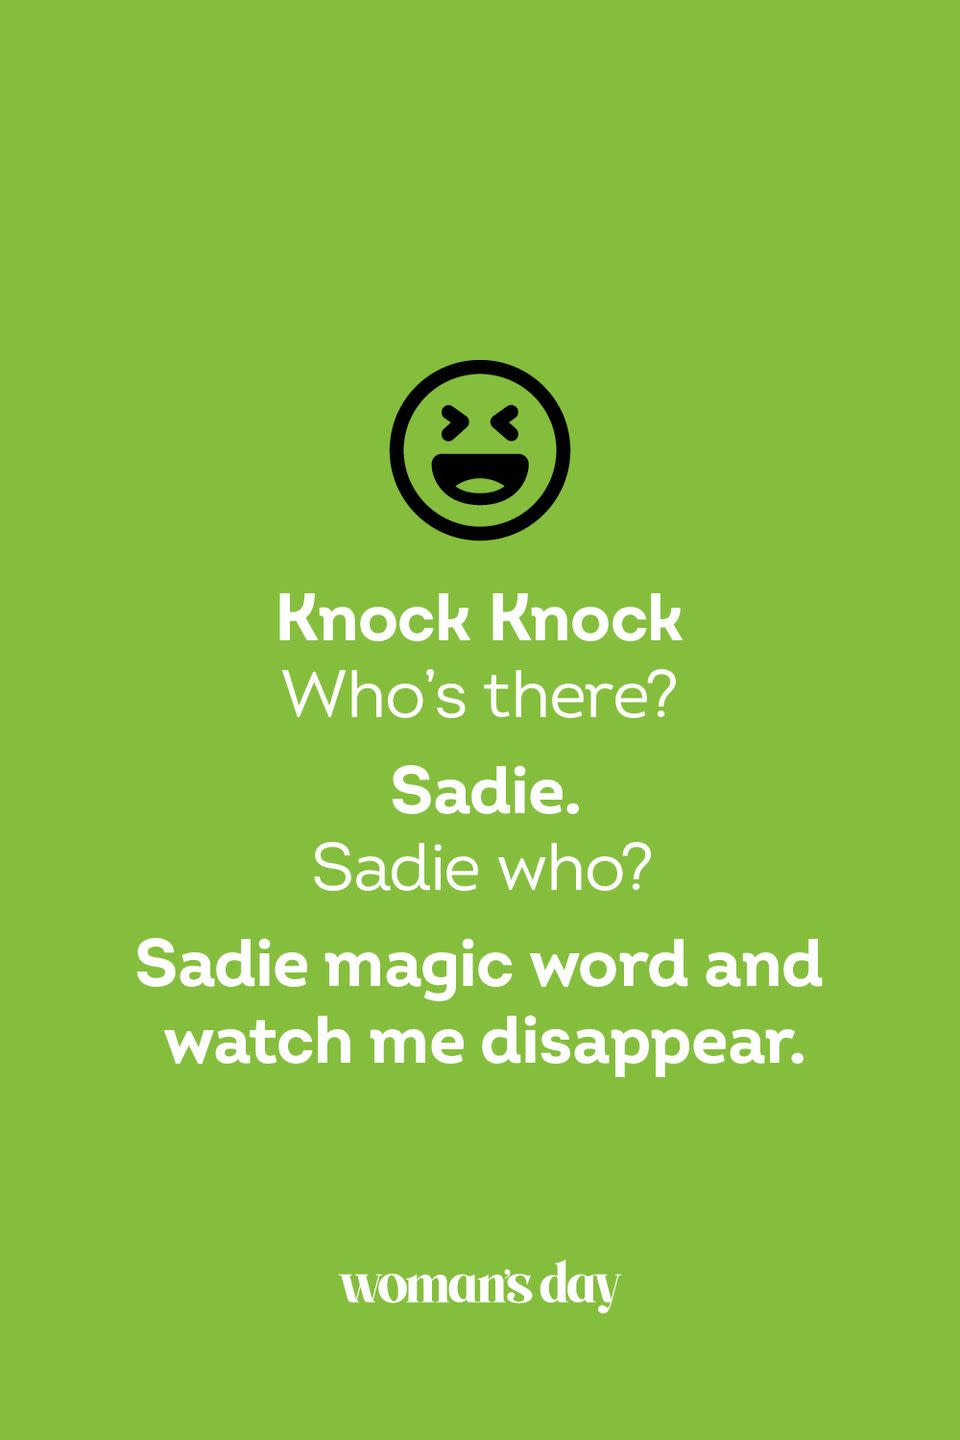 <p><strong>Knock Knock</strong></p><p><em>Who’s there?</em></p><p><strong>Sadie.</strong></p><p><em>Sadie who?</em></p><p><strong>Sadie magic word and watch me disappear.</strong></p>